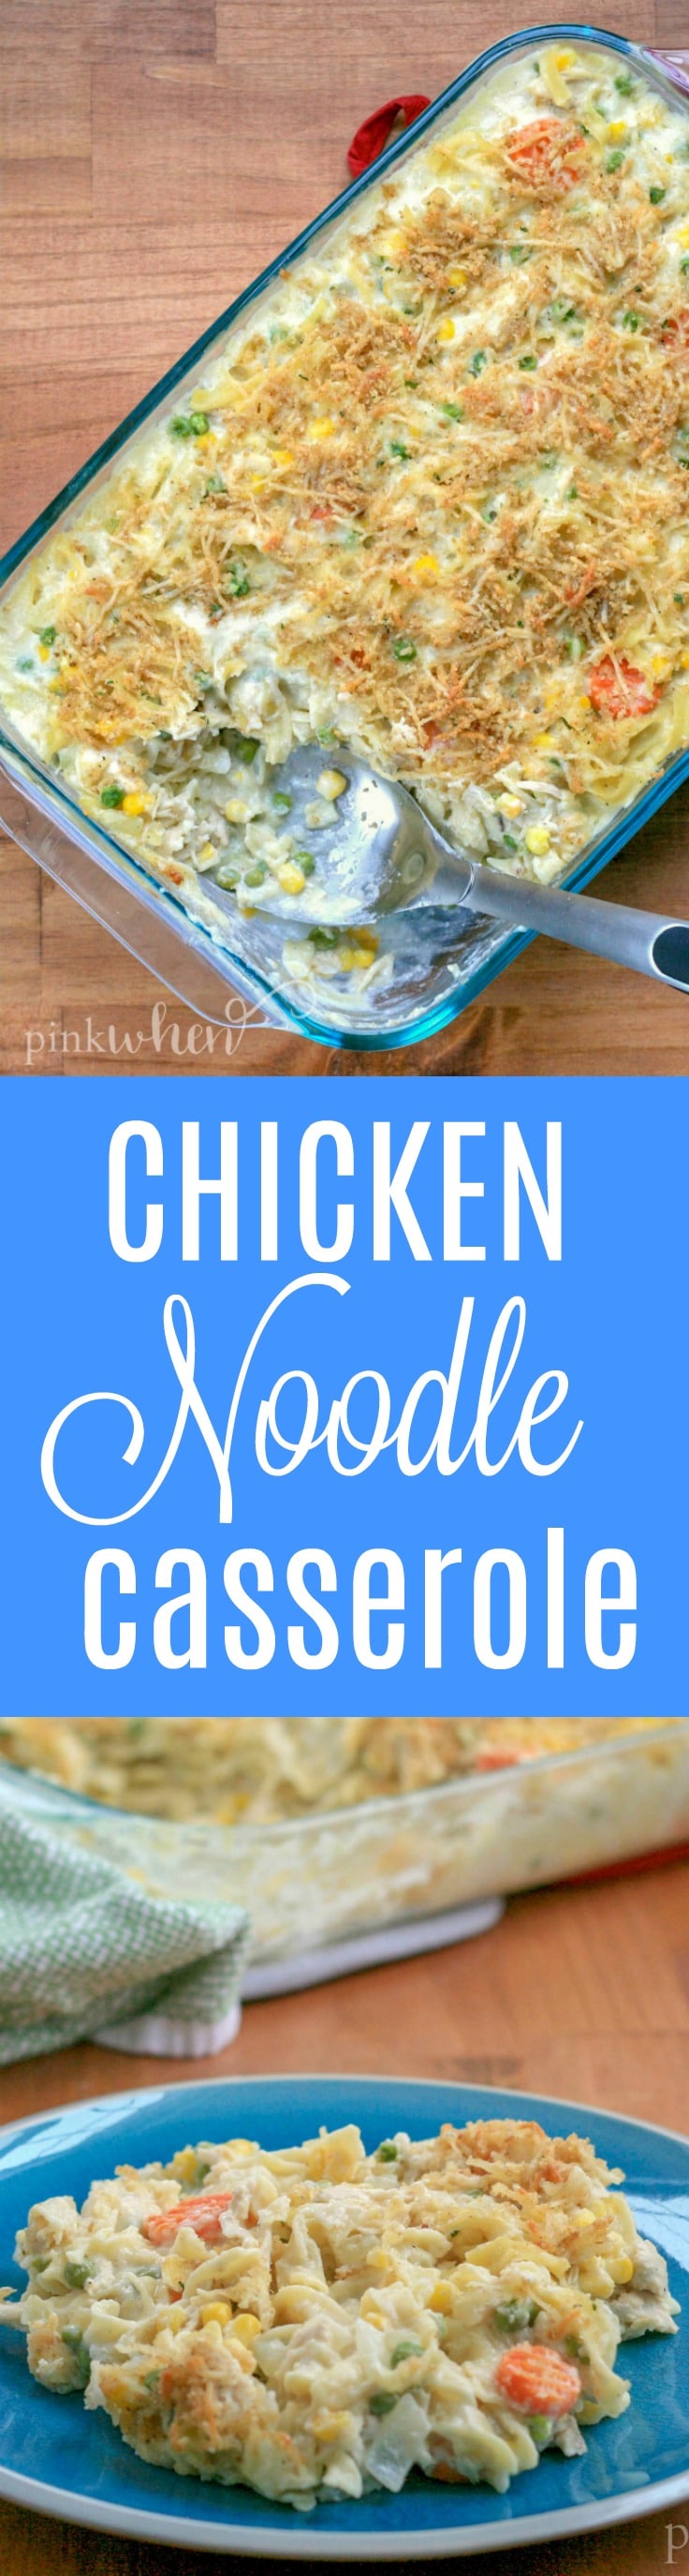 This Chicken Noodle Casserole is comfort food at it's finest. More filling than soup and a surefire family favorite. #easydinnerrecipe